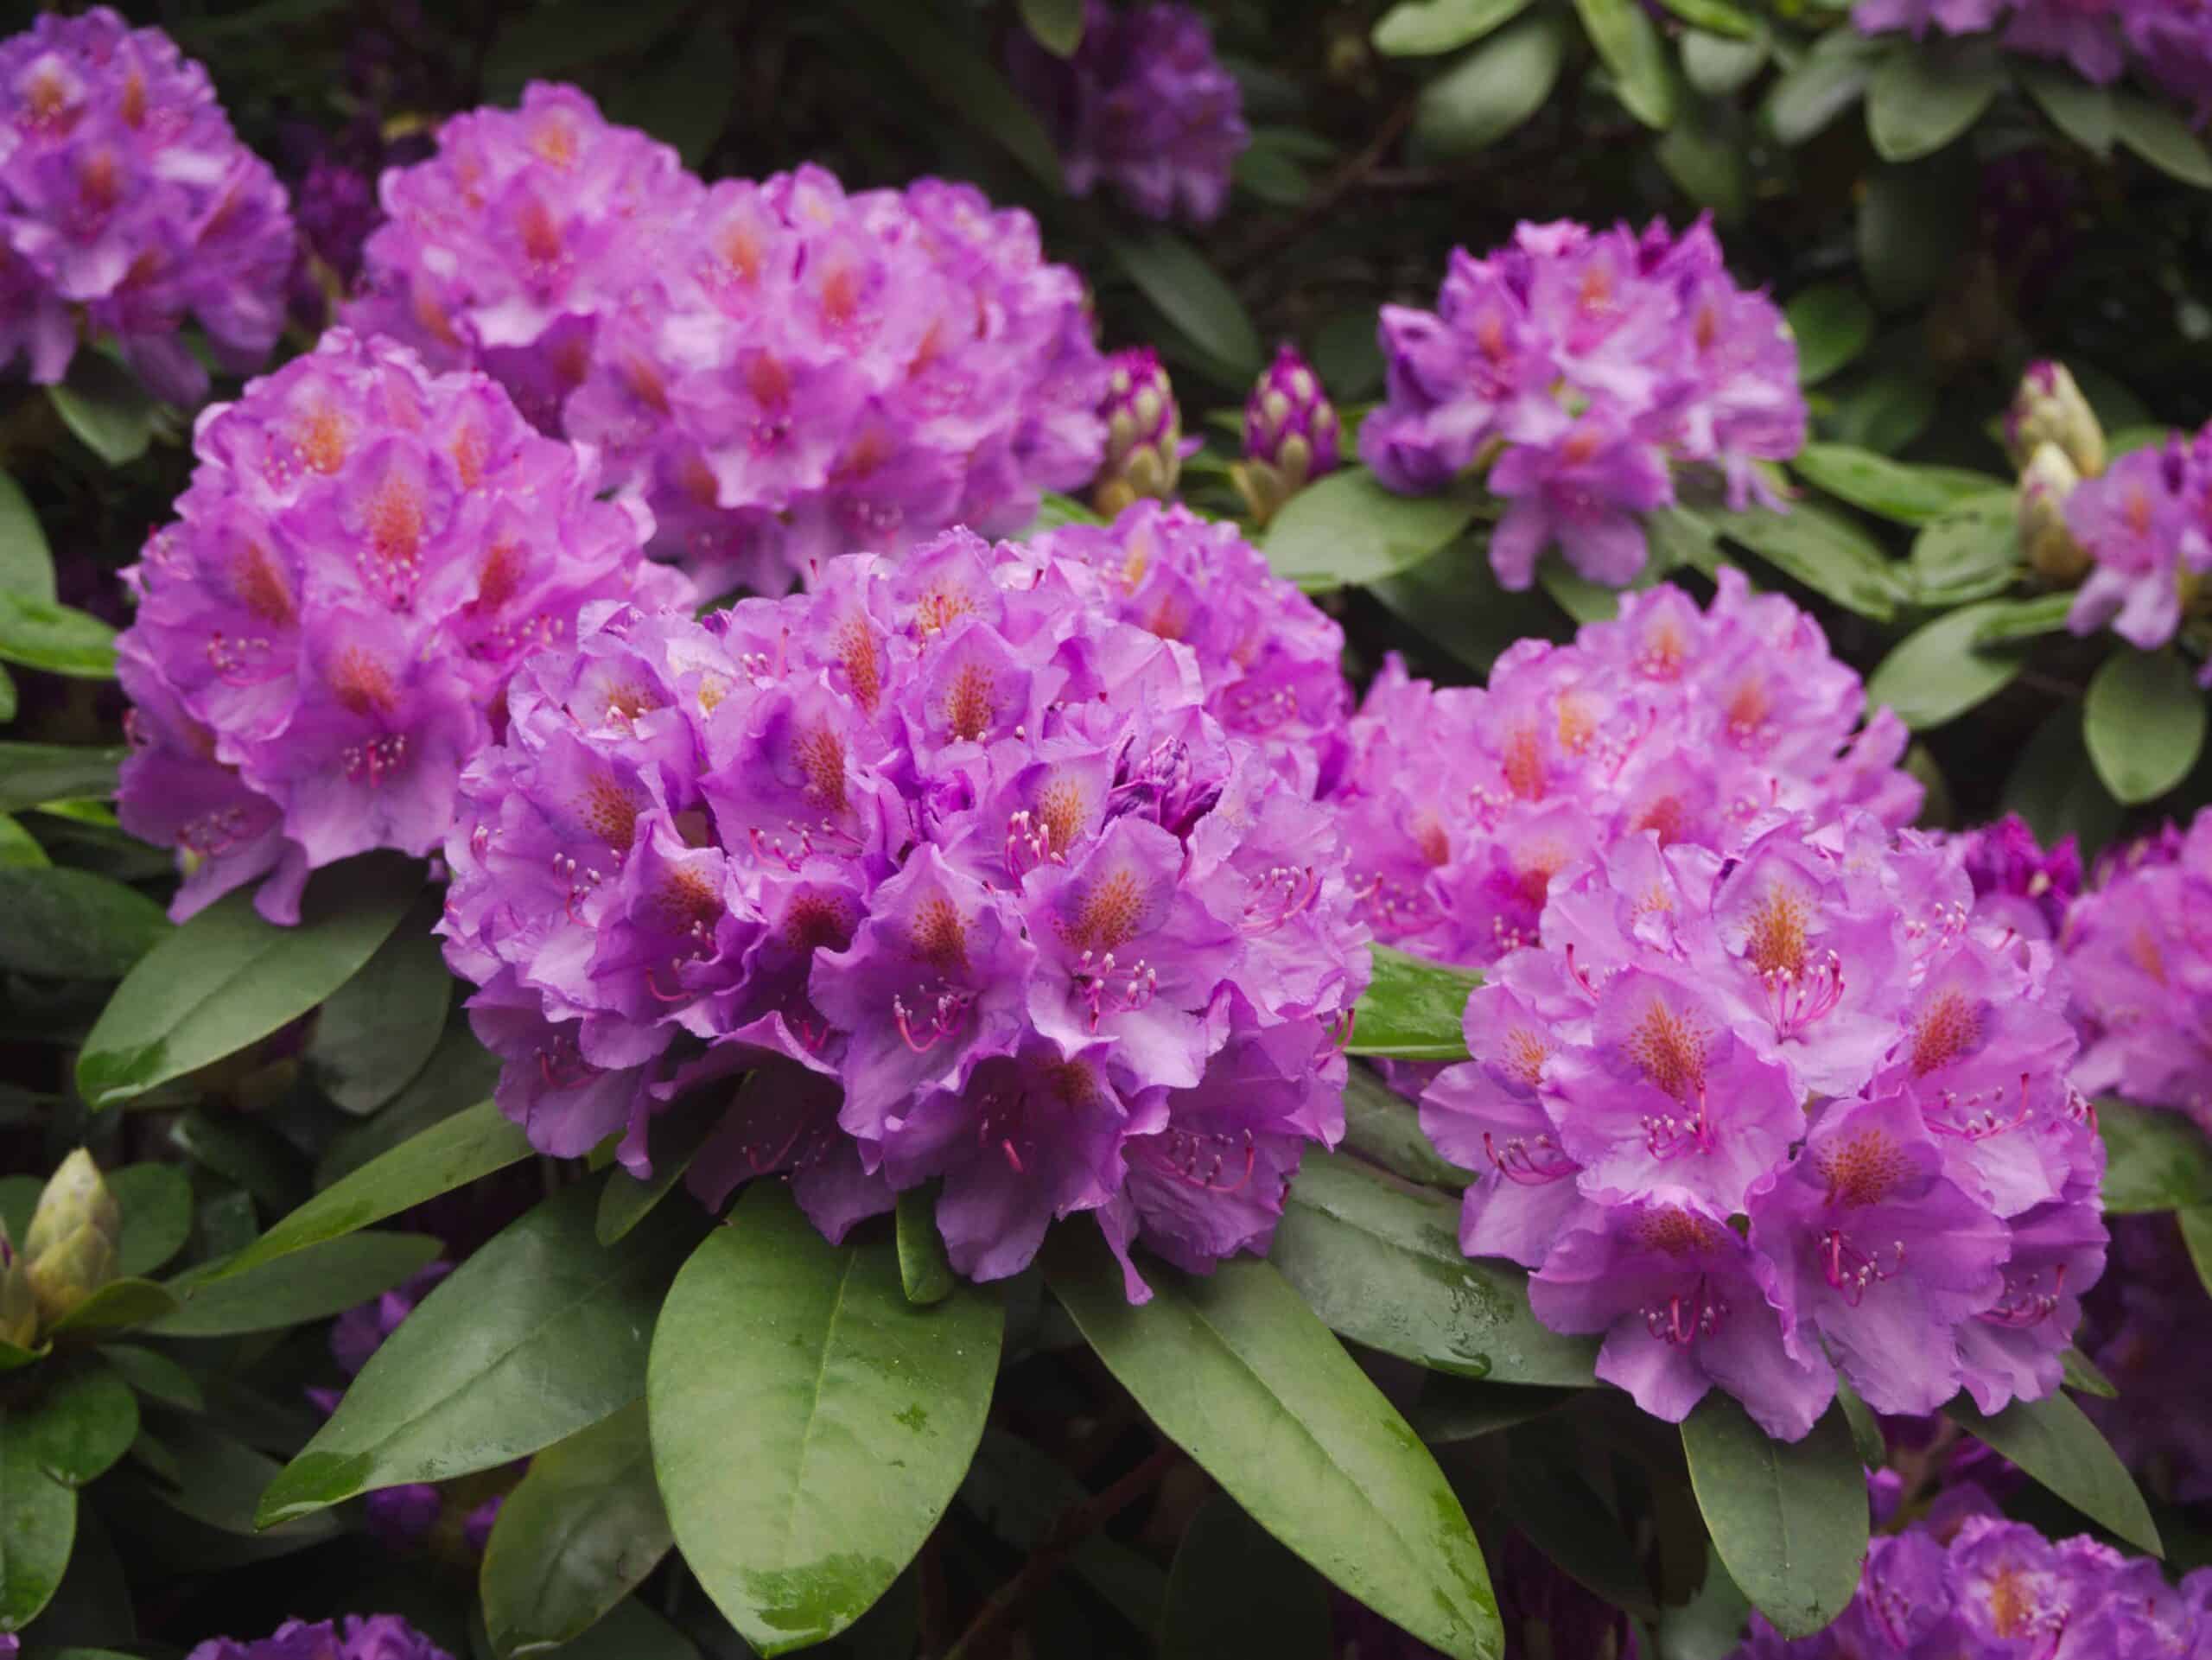 Beautiful, blooming, purple Rhododendrons and their green leaves